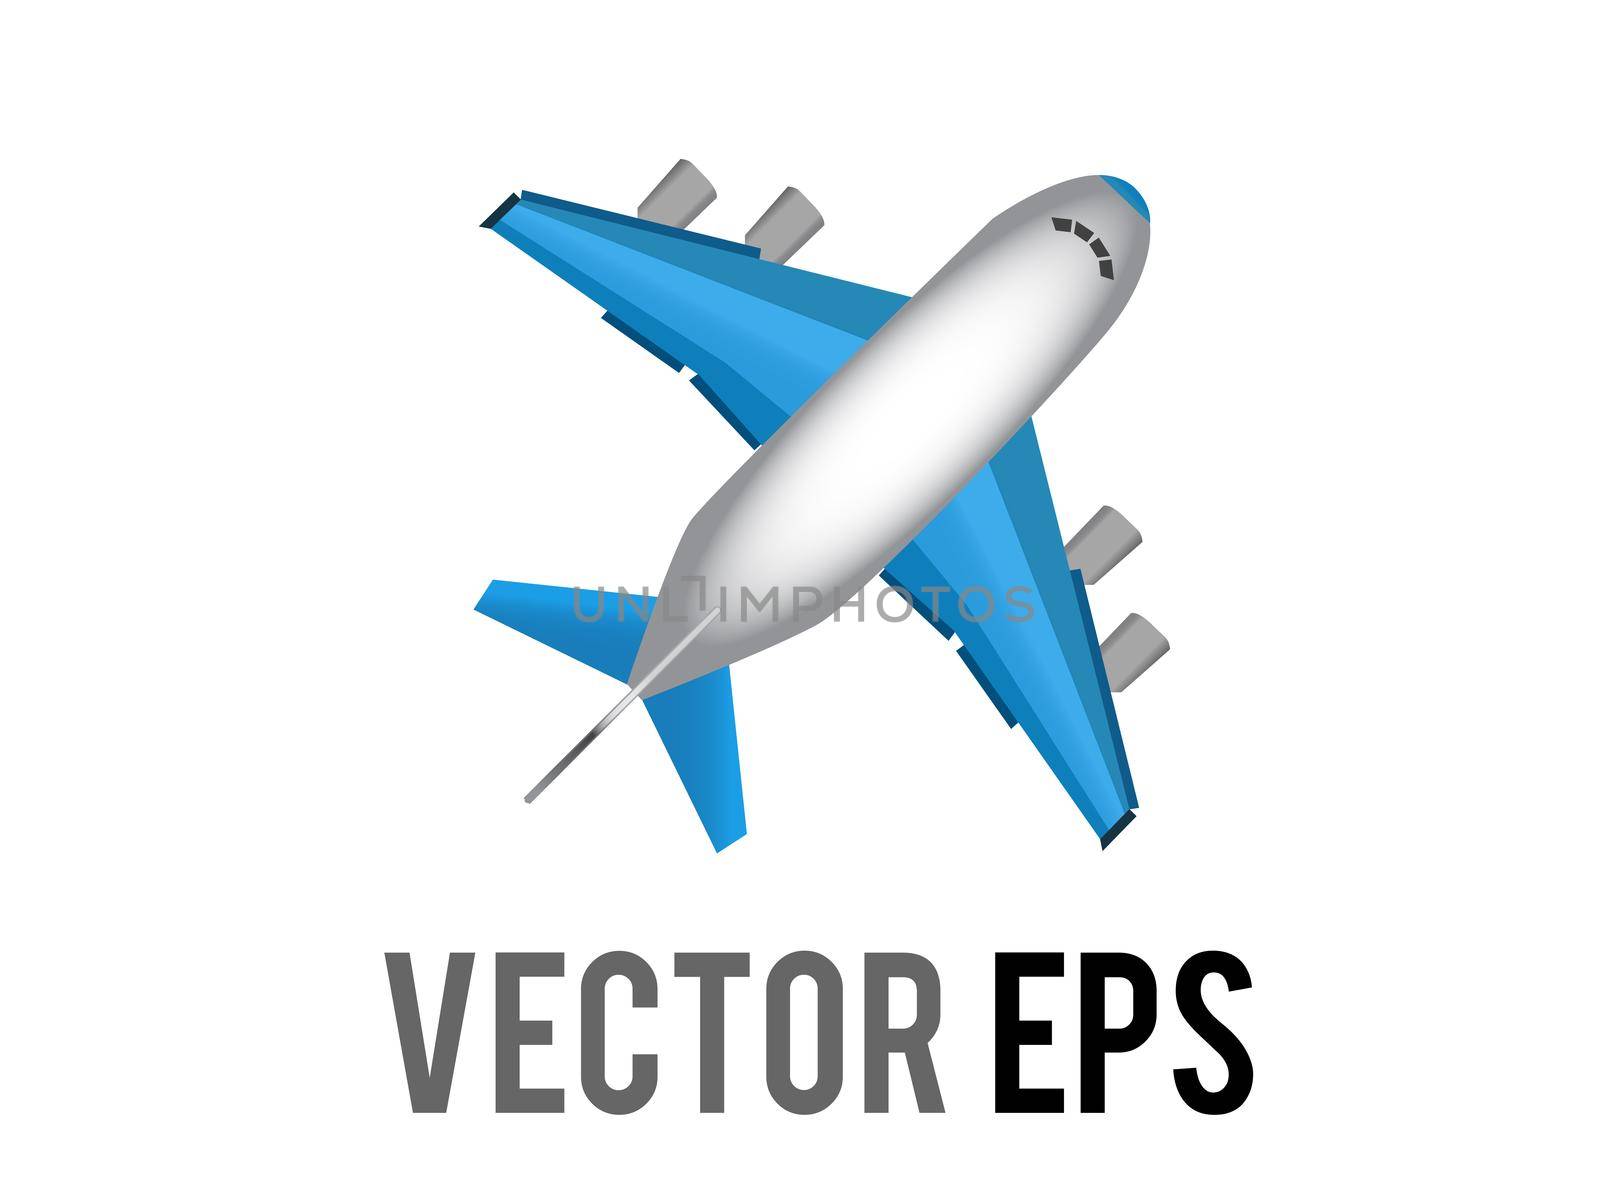 Vector white literal airplane icon with blue wings and engines by cougarsan